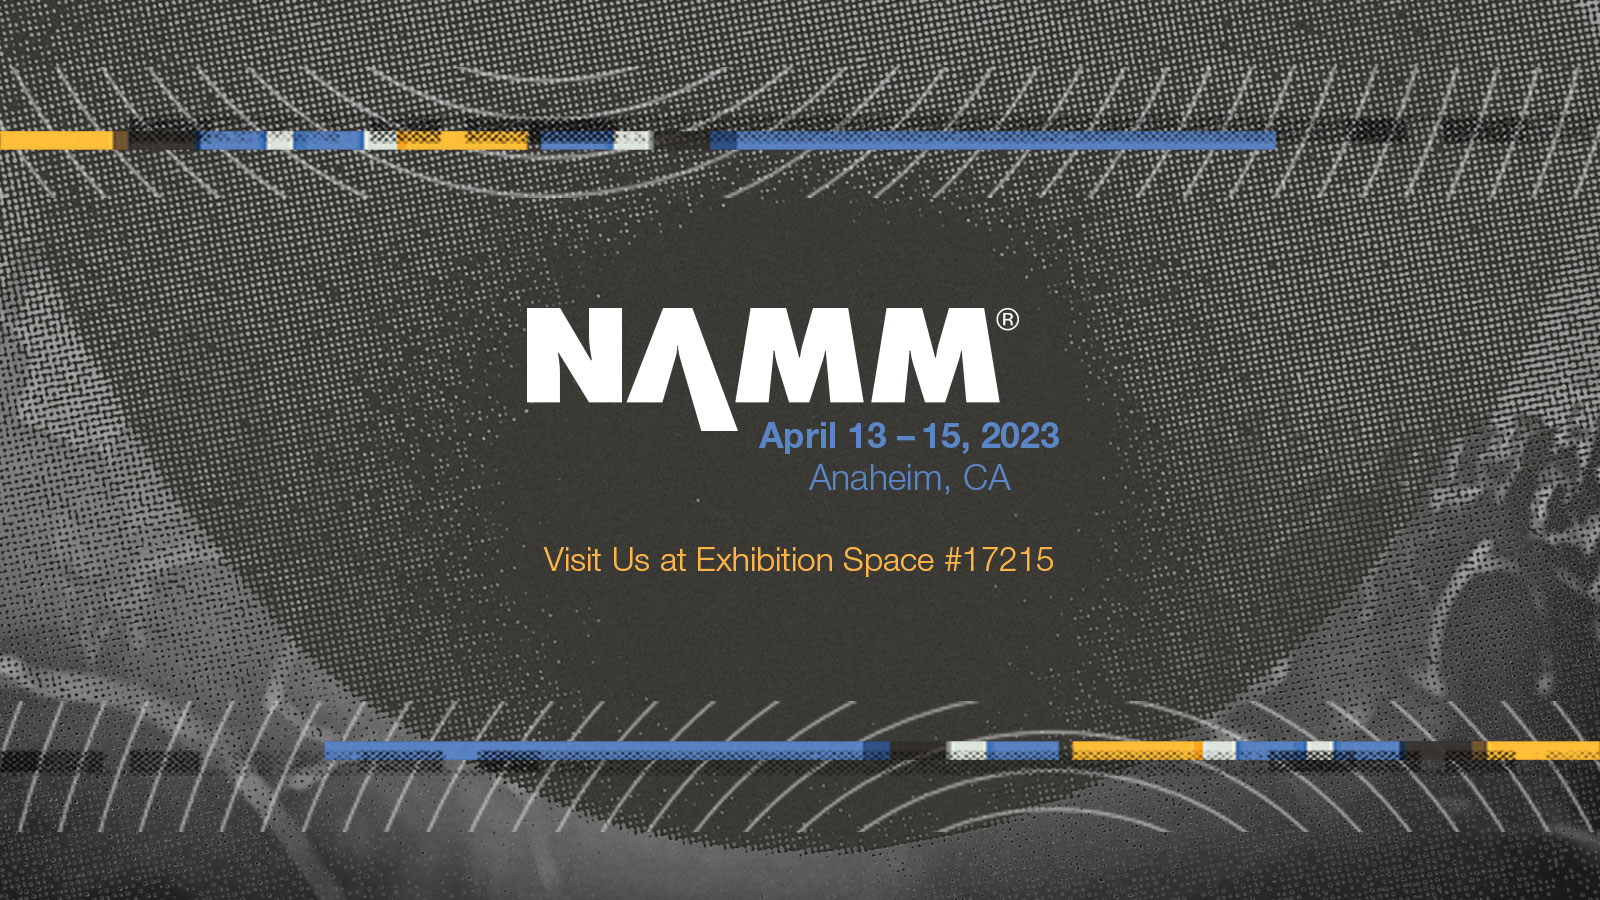 Meyer Sound Gears Up for Touring, Recording, and Immersive Market Impact at the 2023 NAMM Show